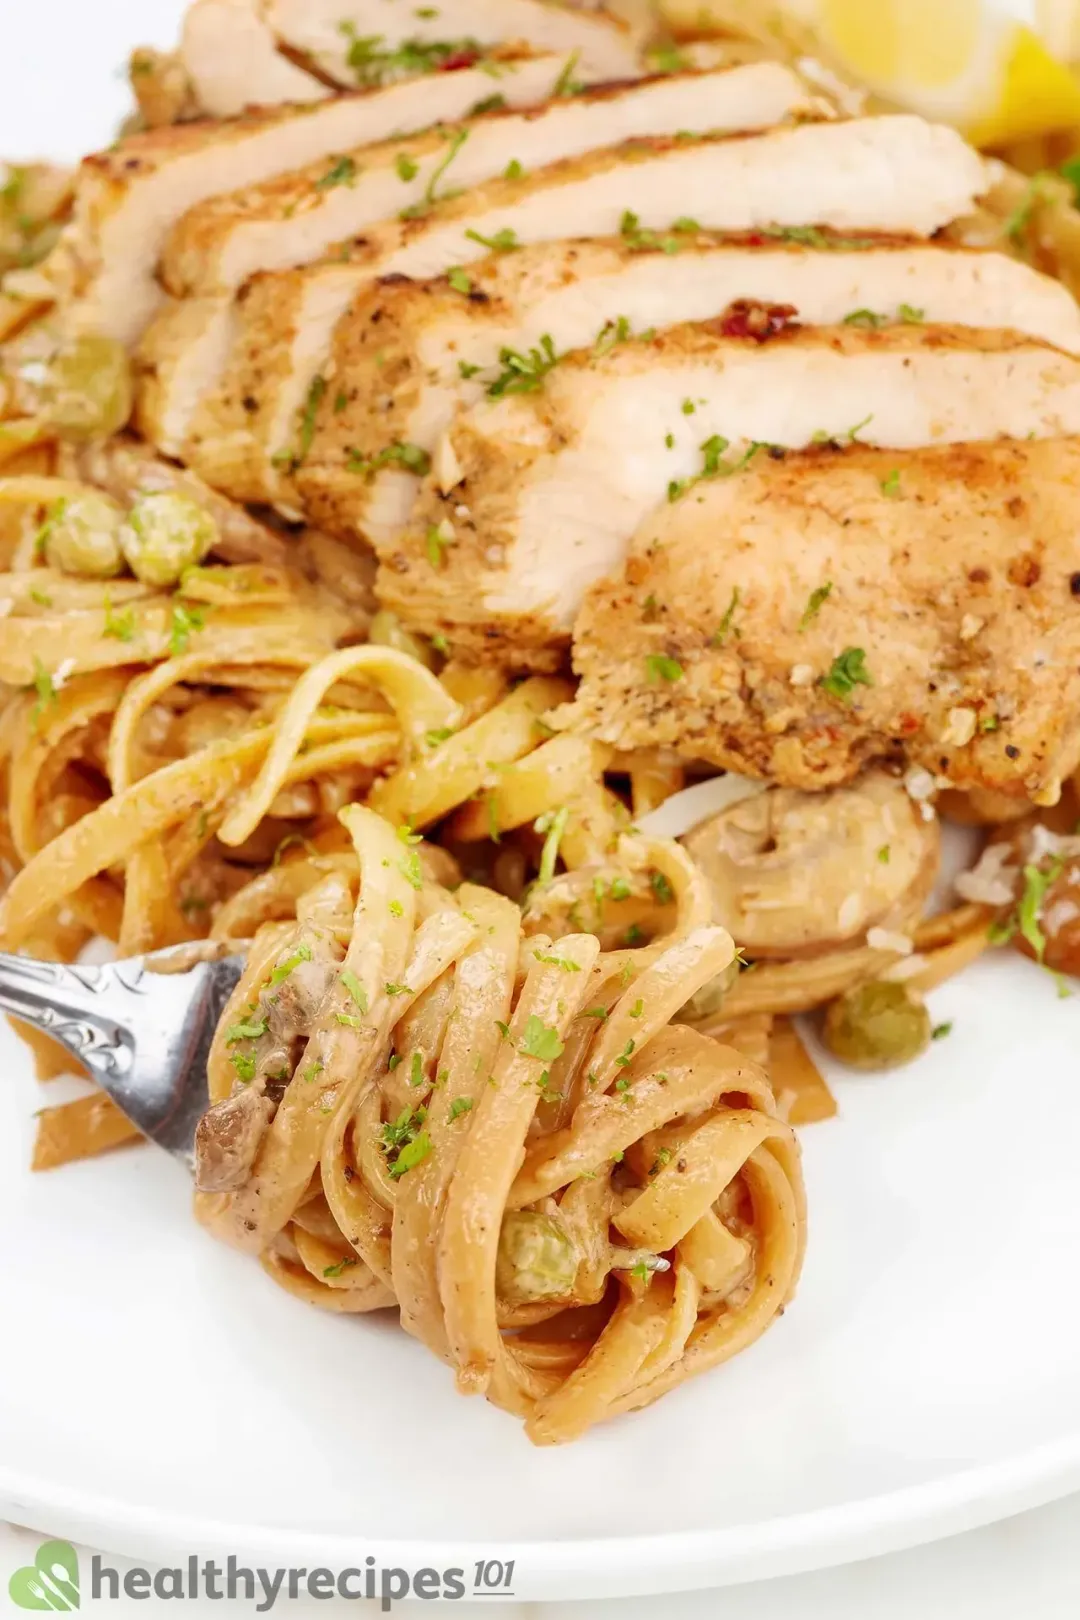 Is It Healthy to Cook Chicken Breast in an Instant Pot